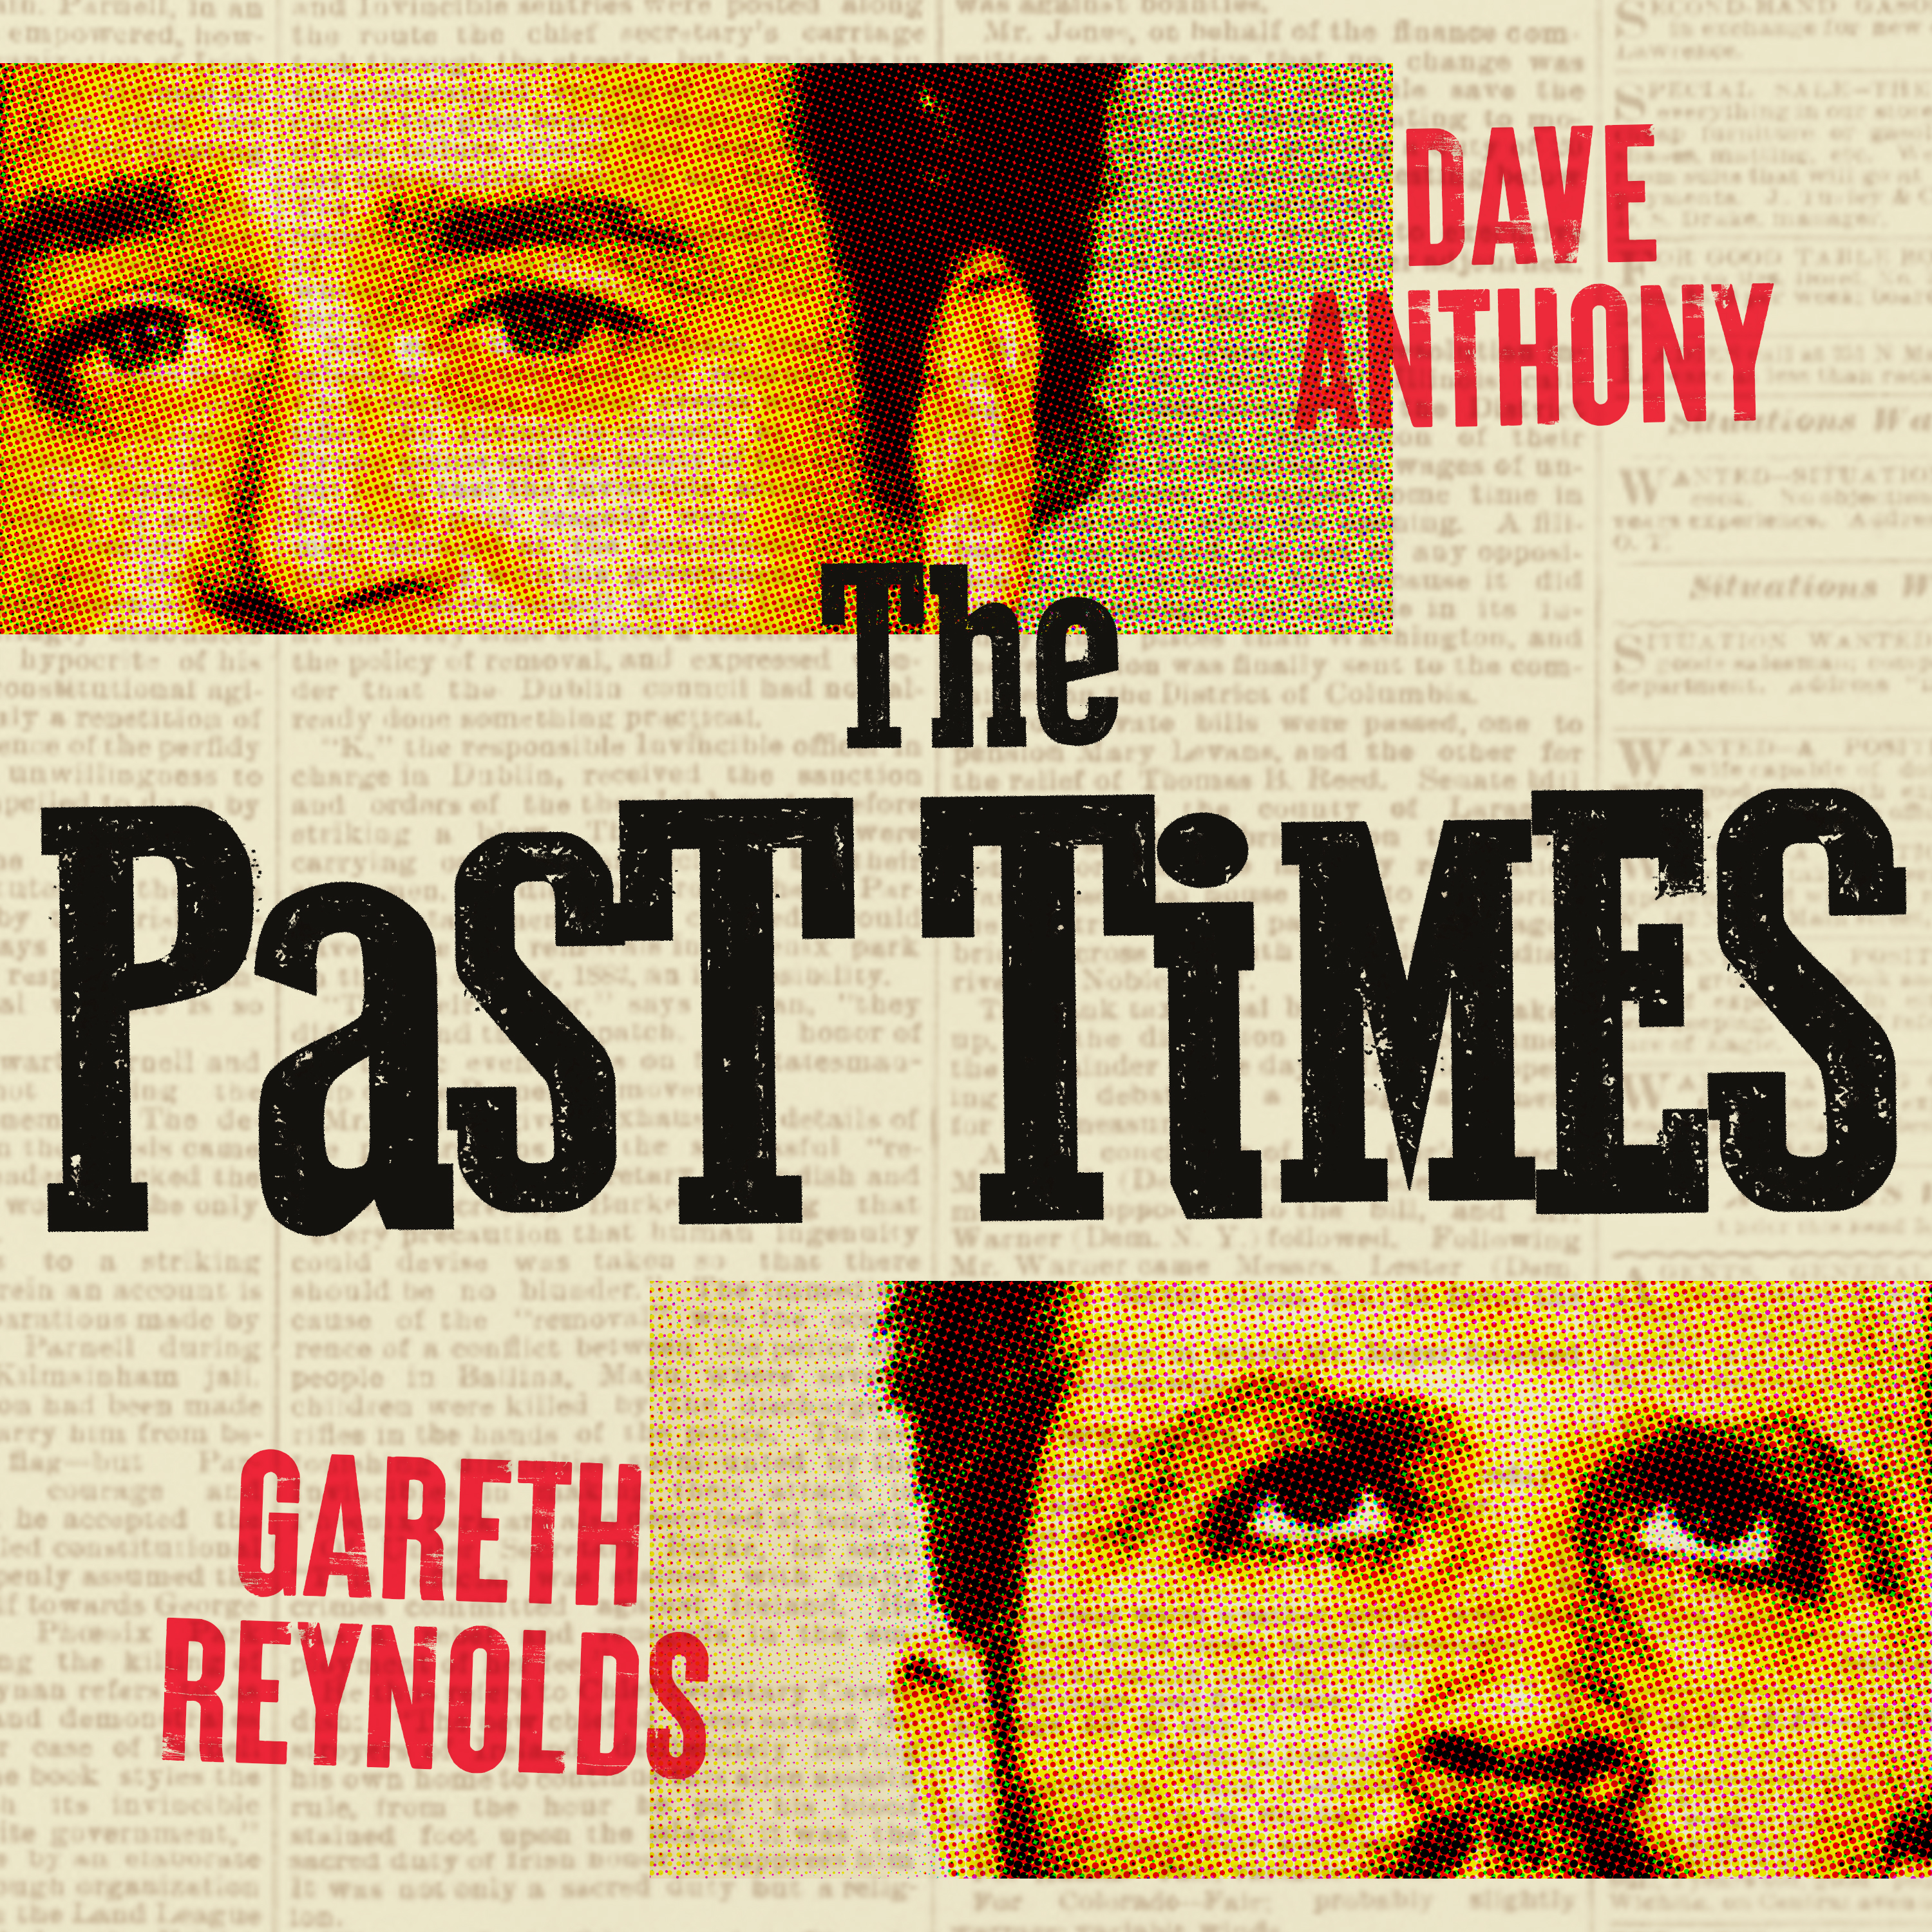 20 - The Past Times with Catherine Reitman